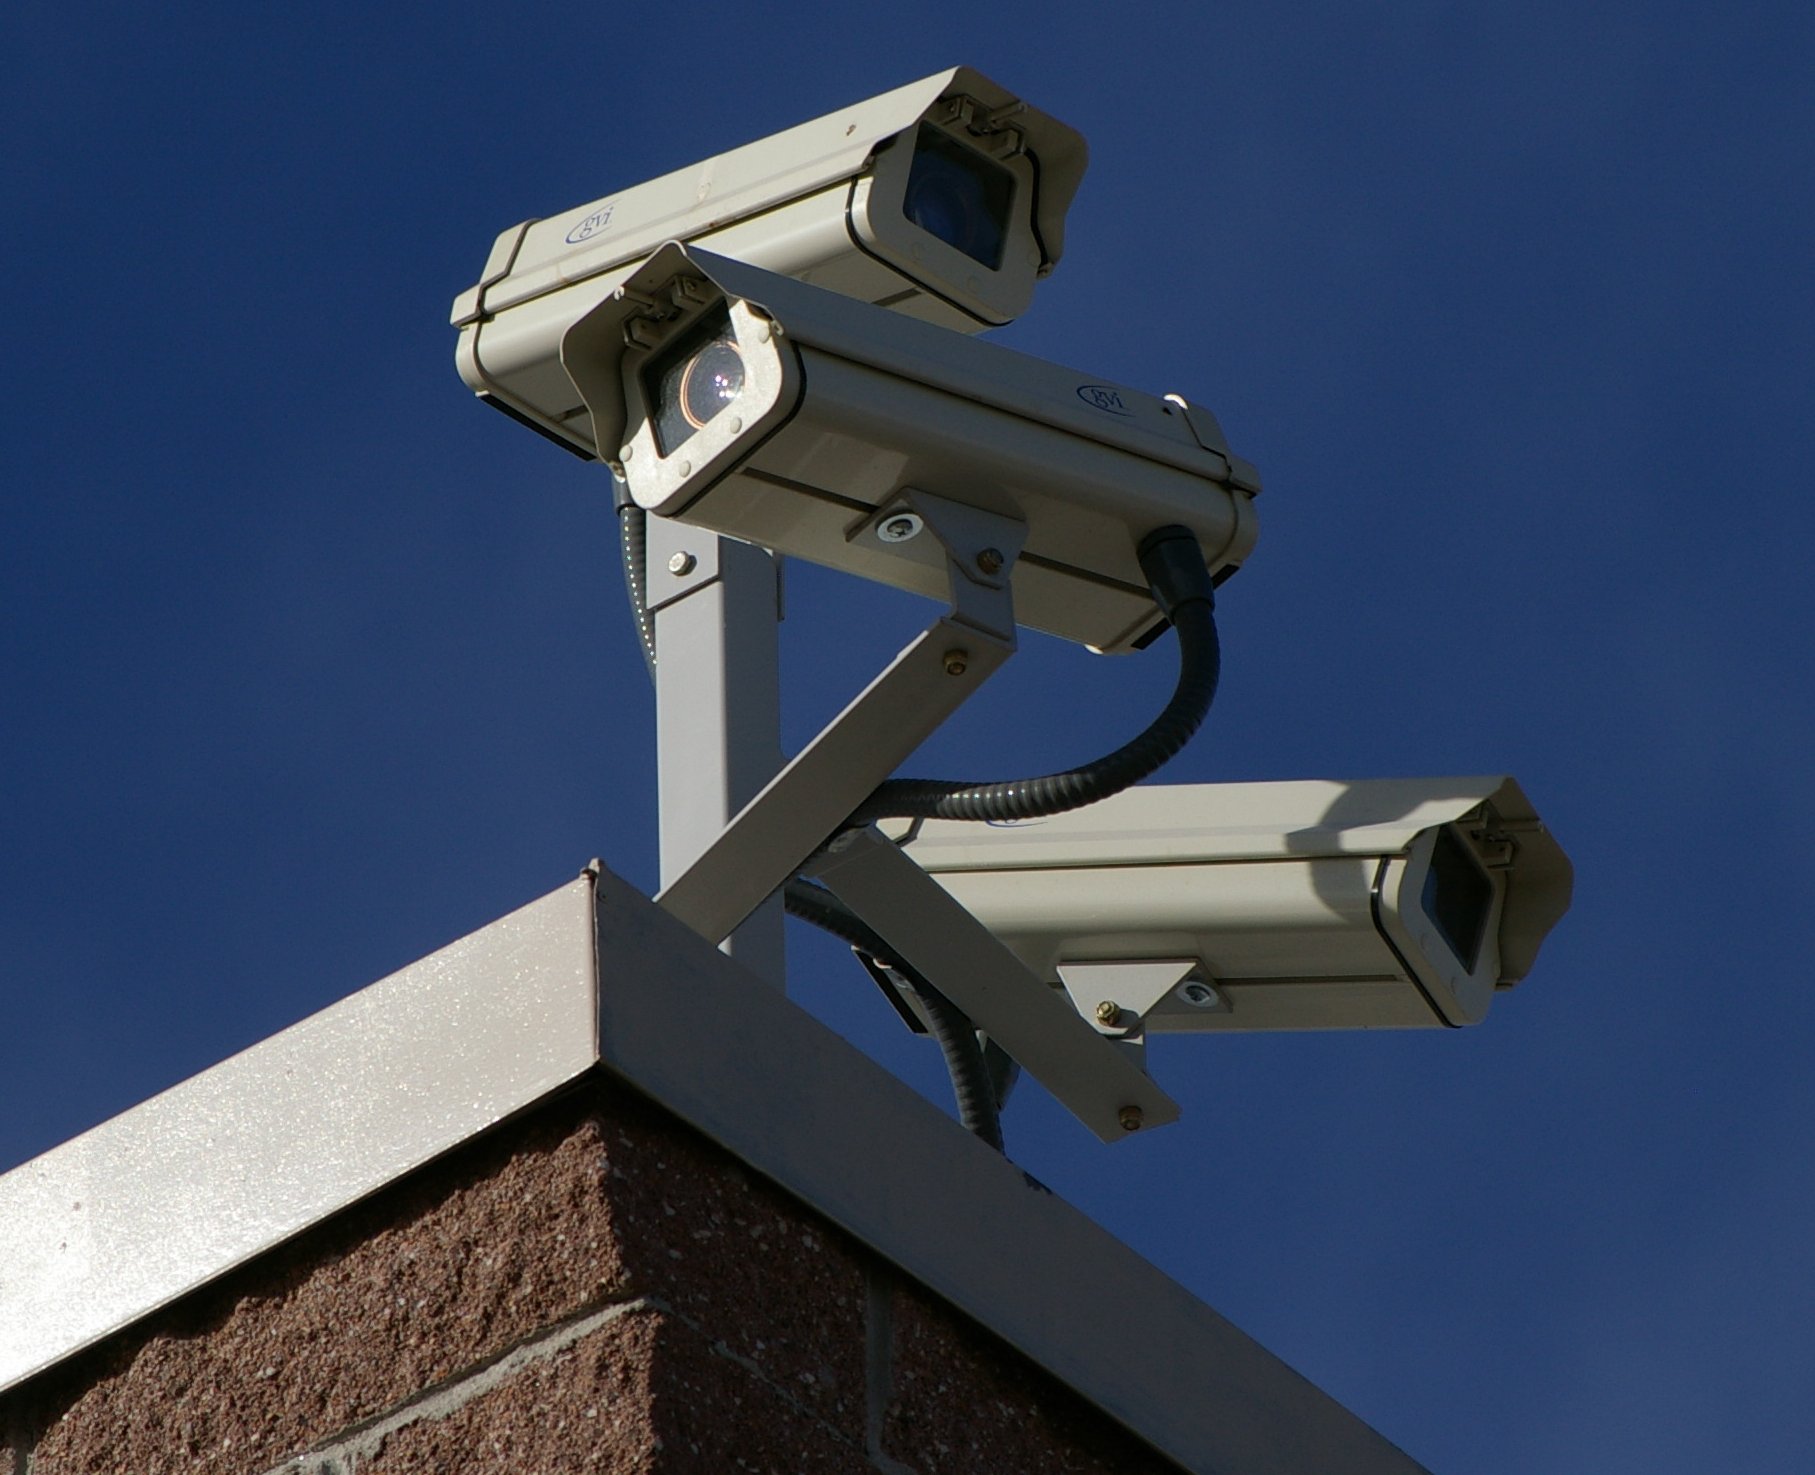 The use of cctv essay